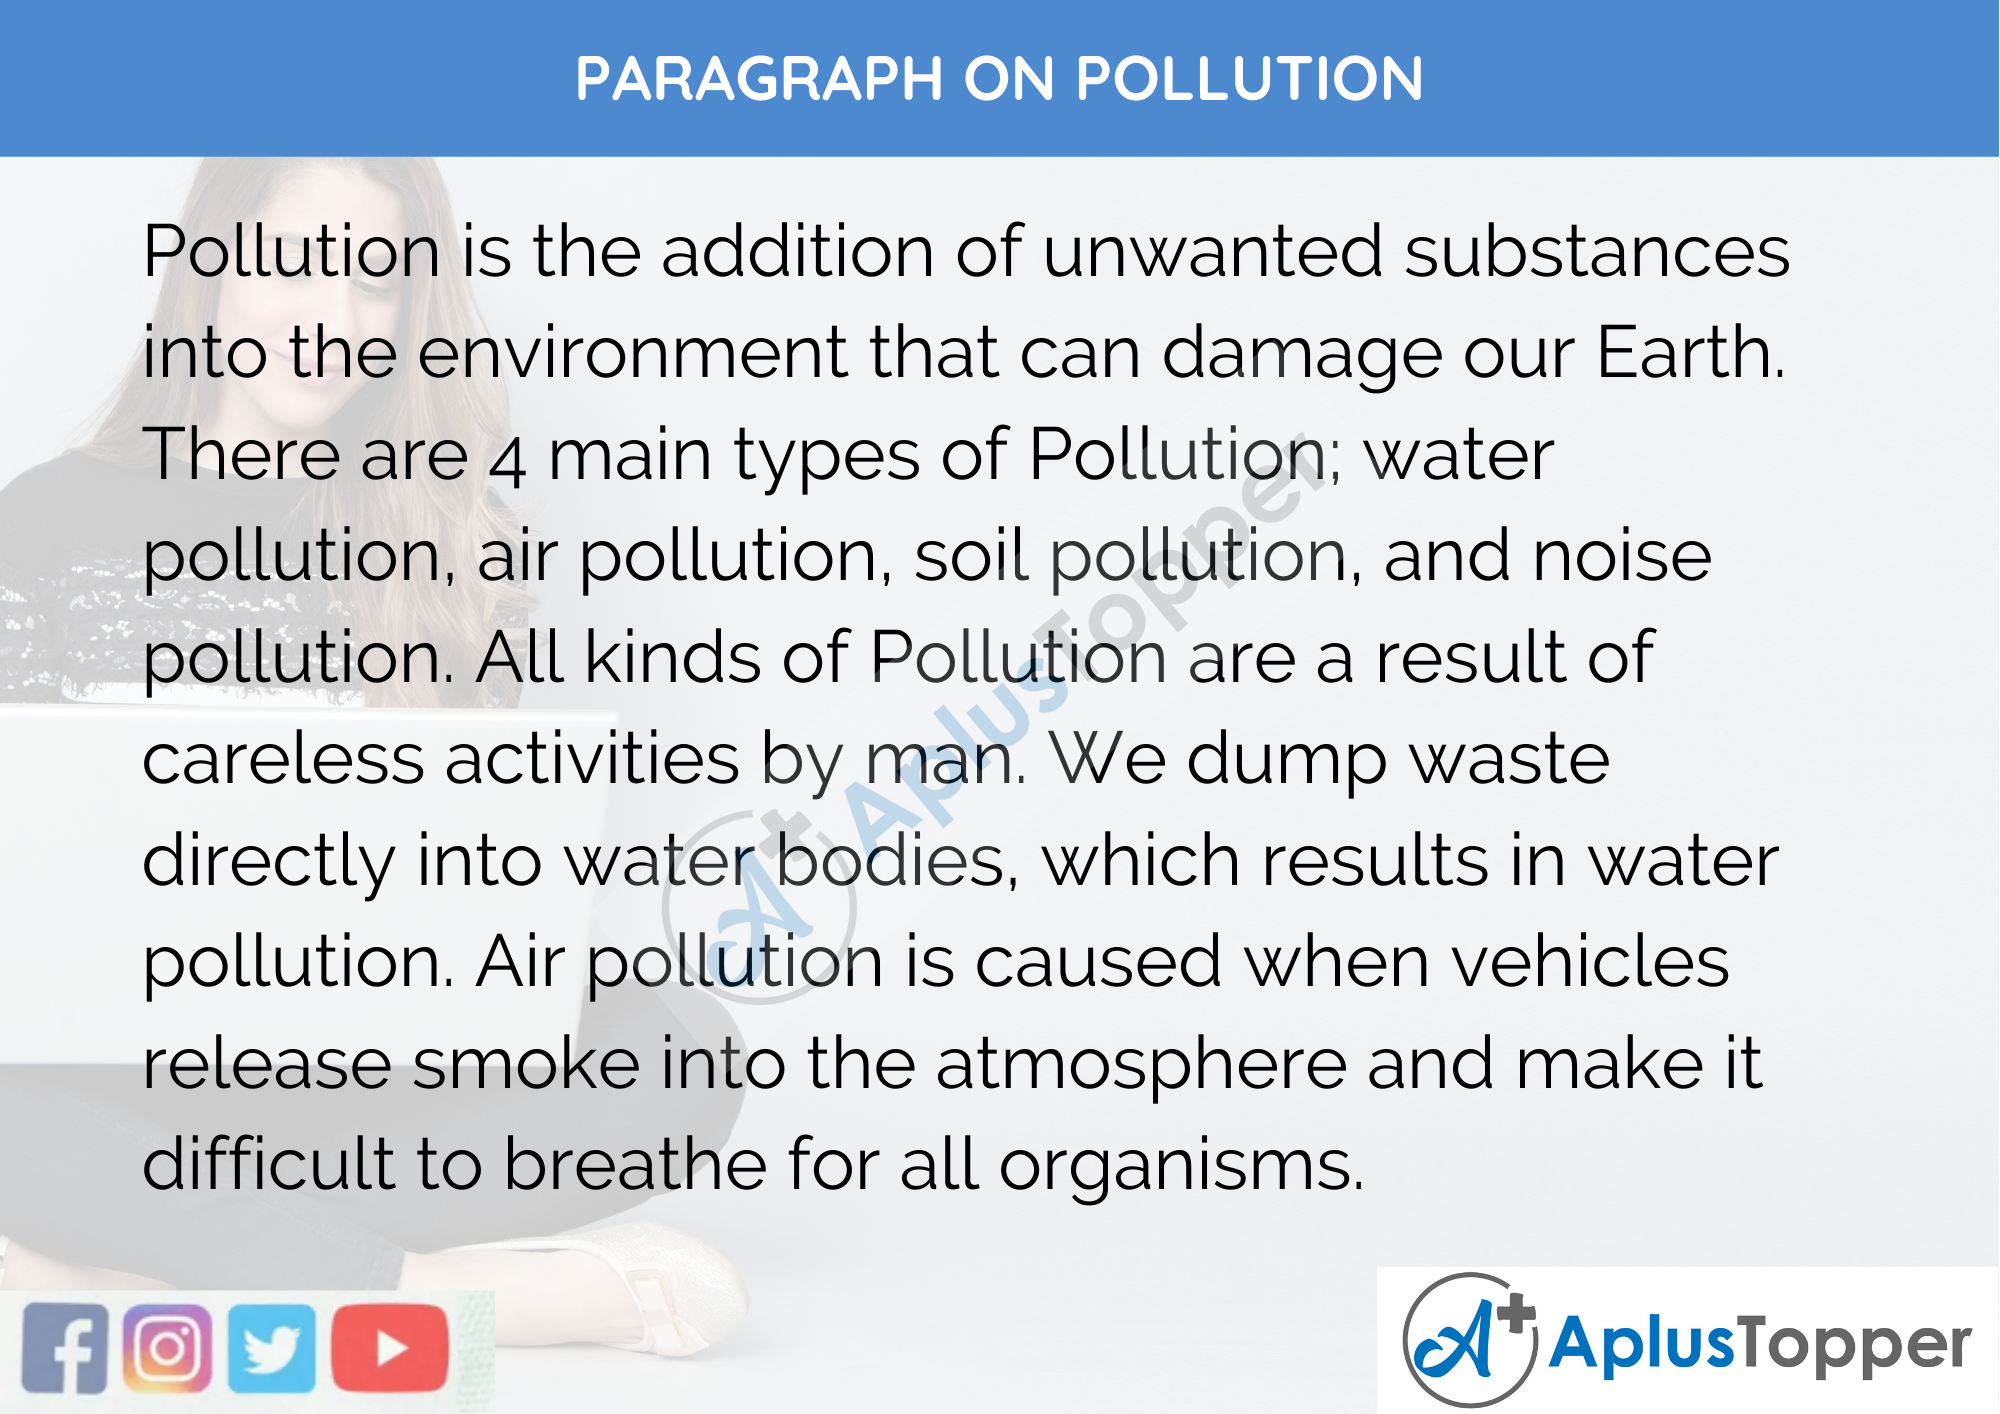 Paragraph on Pollution - 100 Words for Class 1, 2, 3 Kids